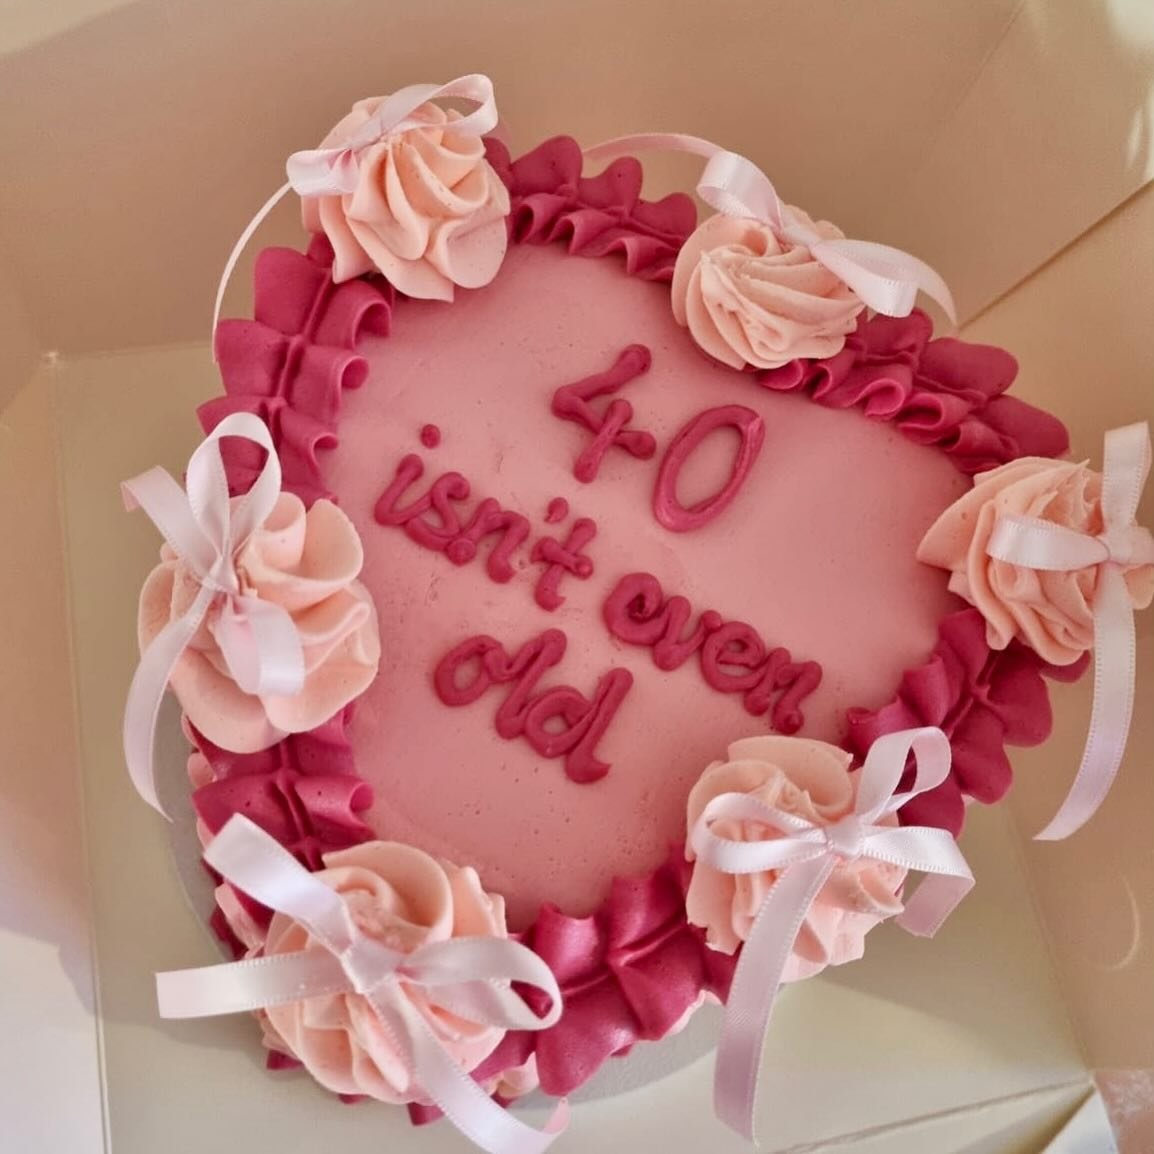 40 isn&rsquo;t even old!!!! Do you agree!? Hard yes from me!!! 💓🙌🎉👌

Loving this little vintage bow cake! Shop now and personalise with your own text! 🎀🎀🎀